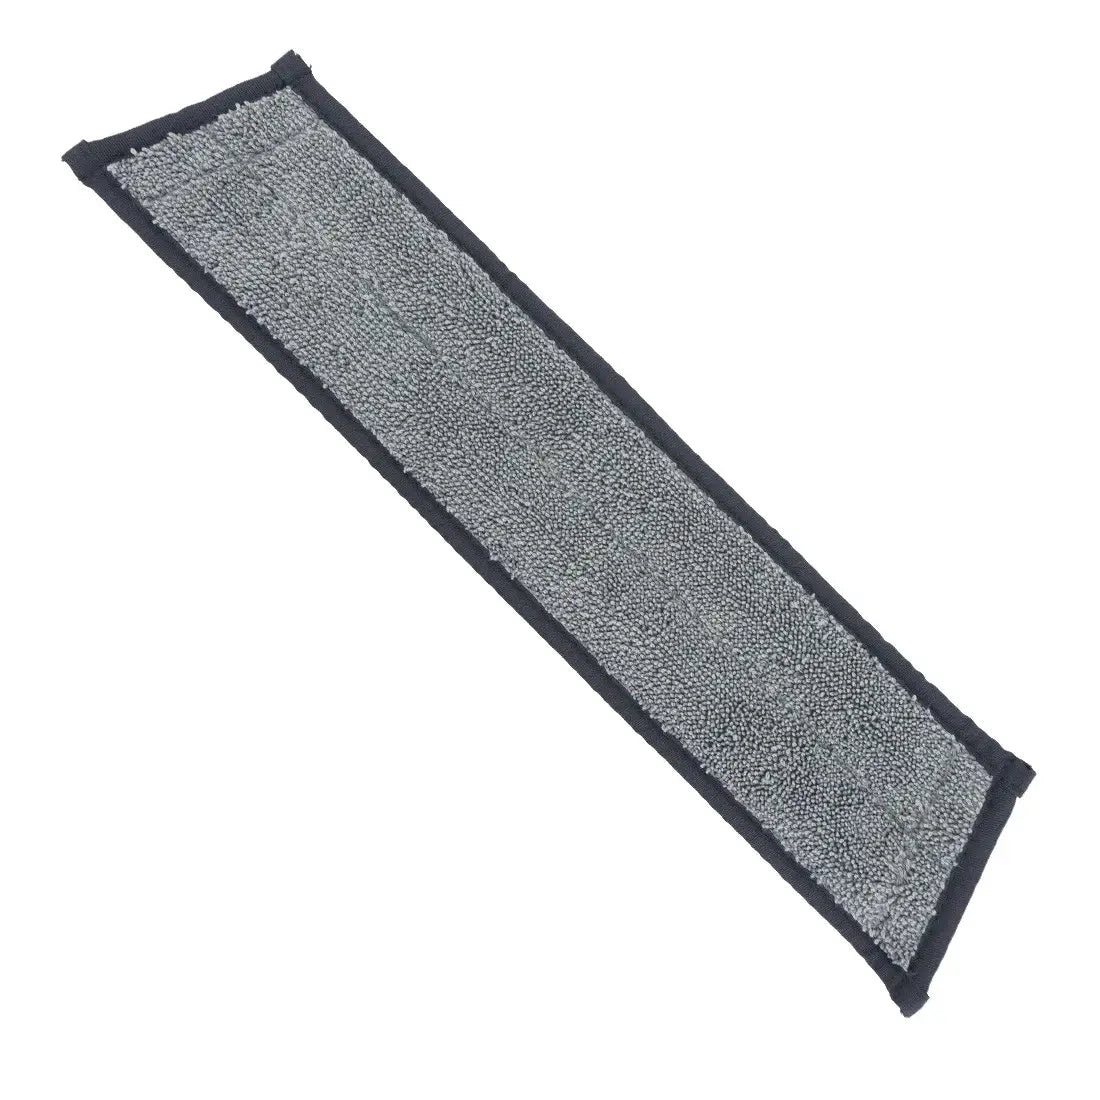 Unger new nLite microfiber cleaning pad